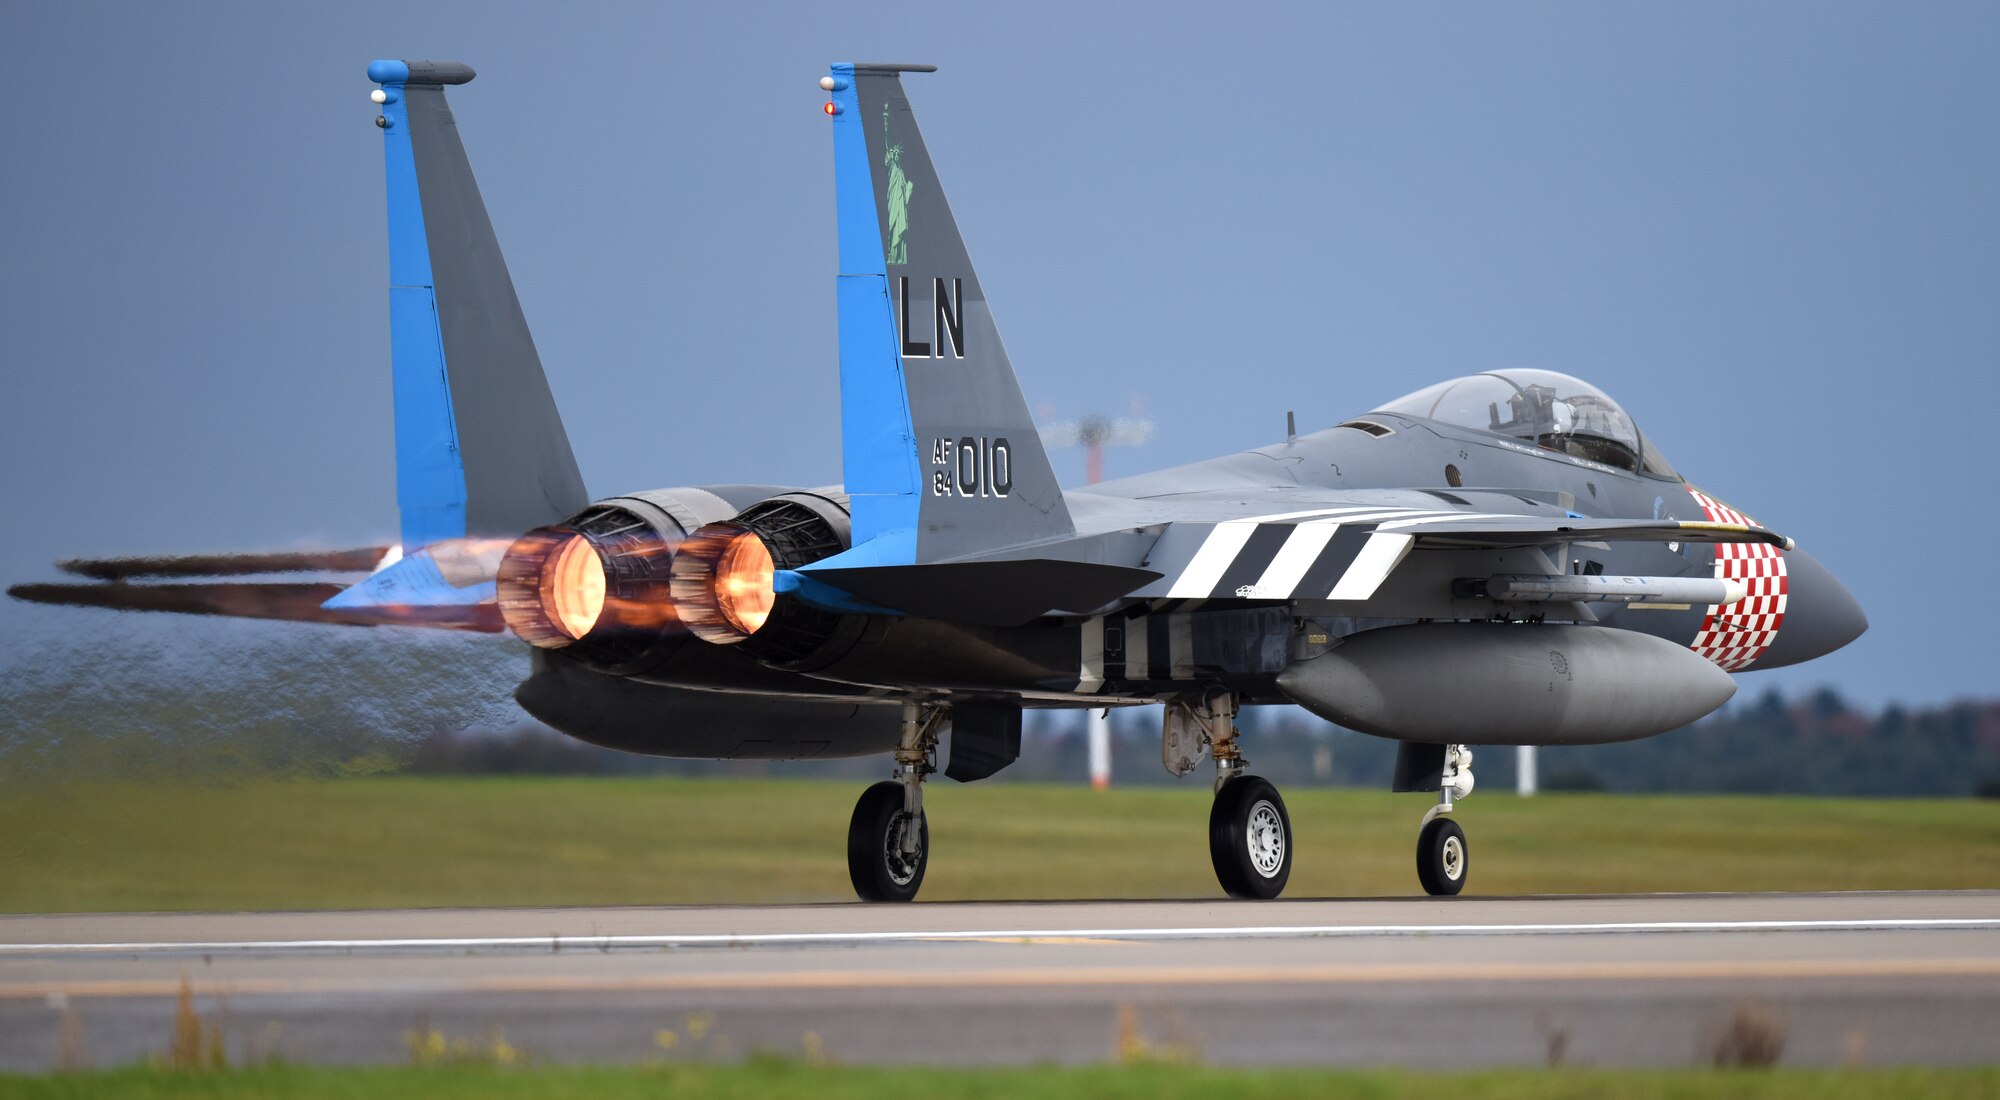 An F-15C Eagle assigned to the 493rd Fighter Squadron takes off in support of exercise Point Blank 19-8 at Royal Air Force Lakenheath, England, Nov. 14, 2019. The purpose of Point Blank is to exercise large force capabilities that incorporate current and future wartime scenarios. (U.S. Air Force photo by Airman 1st Class Madeline Herzog)